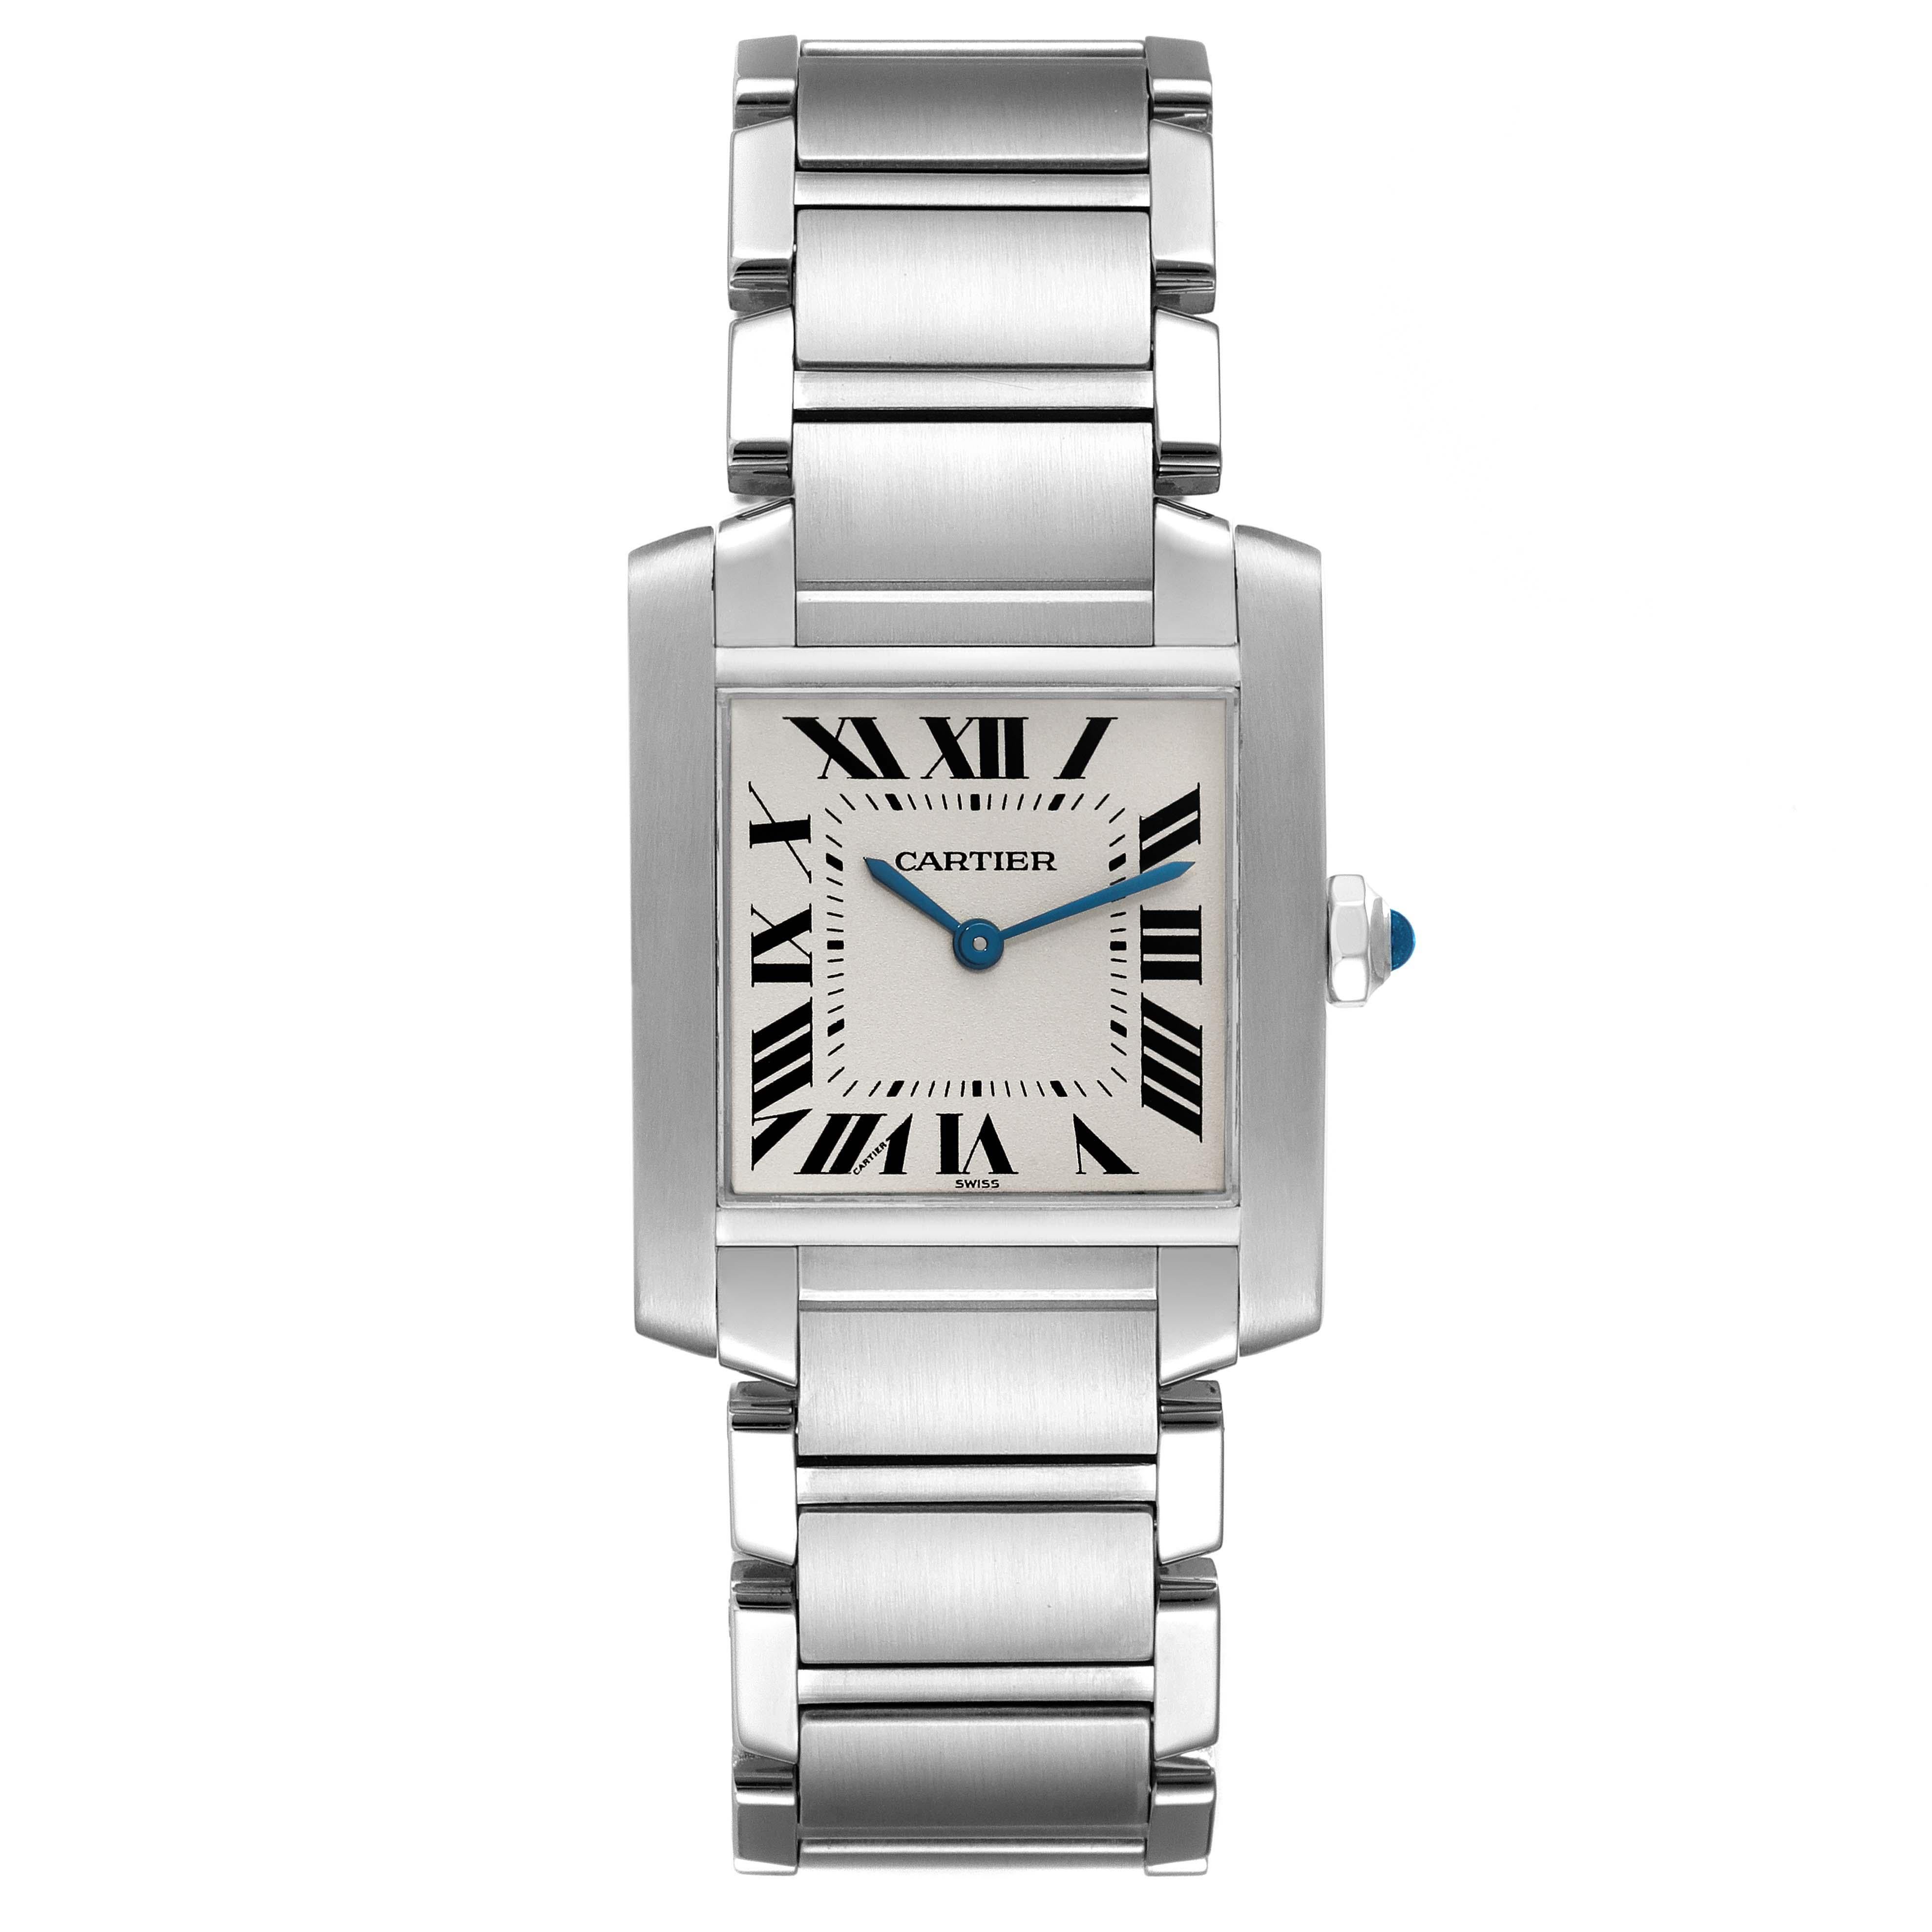 Cartier Tank Francaise Midsize Steel Ladies Watch WSTA0005 Box Papers. Quartz movement. Rectangular stainless steel 25.0 X 30.0 mm case. Octagonal crown set with a blue spinel cabochon. . Scratch resistant sapphire crystal. Silver grained dial with